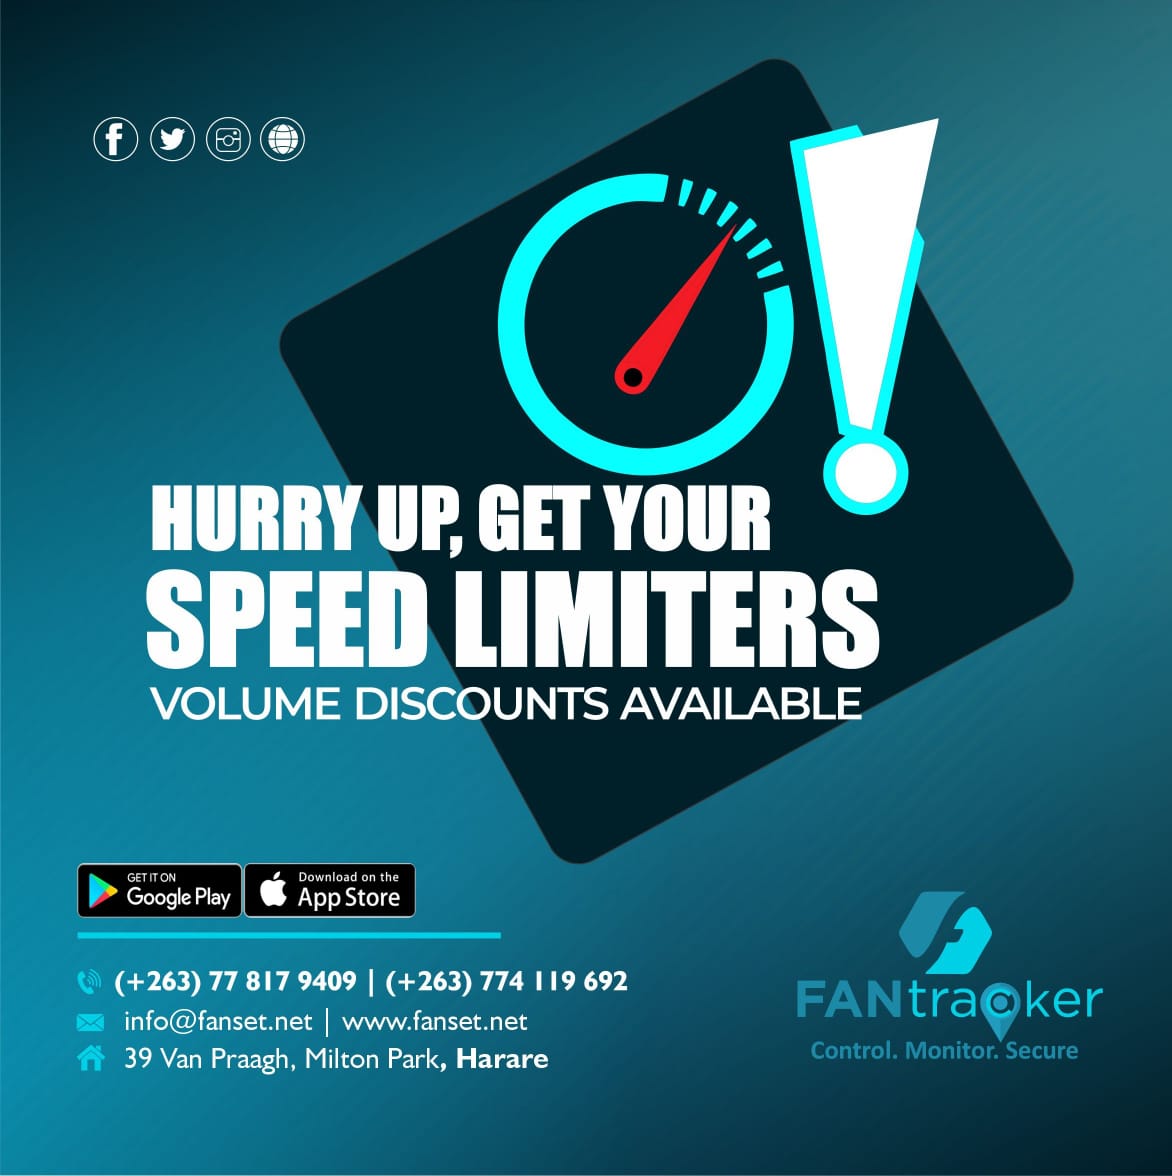 FANTRACKER SPEED LIMITER ON PROMOTION! Unlock Massive Volume Discounts for Uncompromising Safety and Efficiency! Install SAZ Approved Speed Limiters and Vehicle Tracking with FANtracker Contact us on : +263778179409/ 0774119692 #FANtracker #FuelMonitoring #Vehicletracking